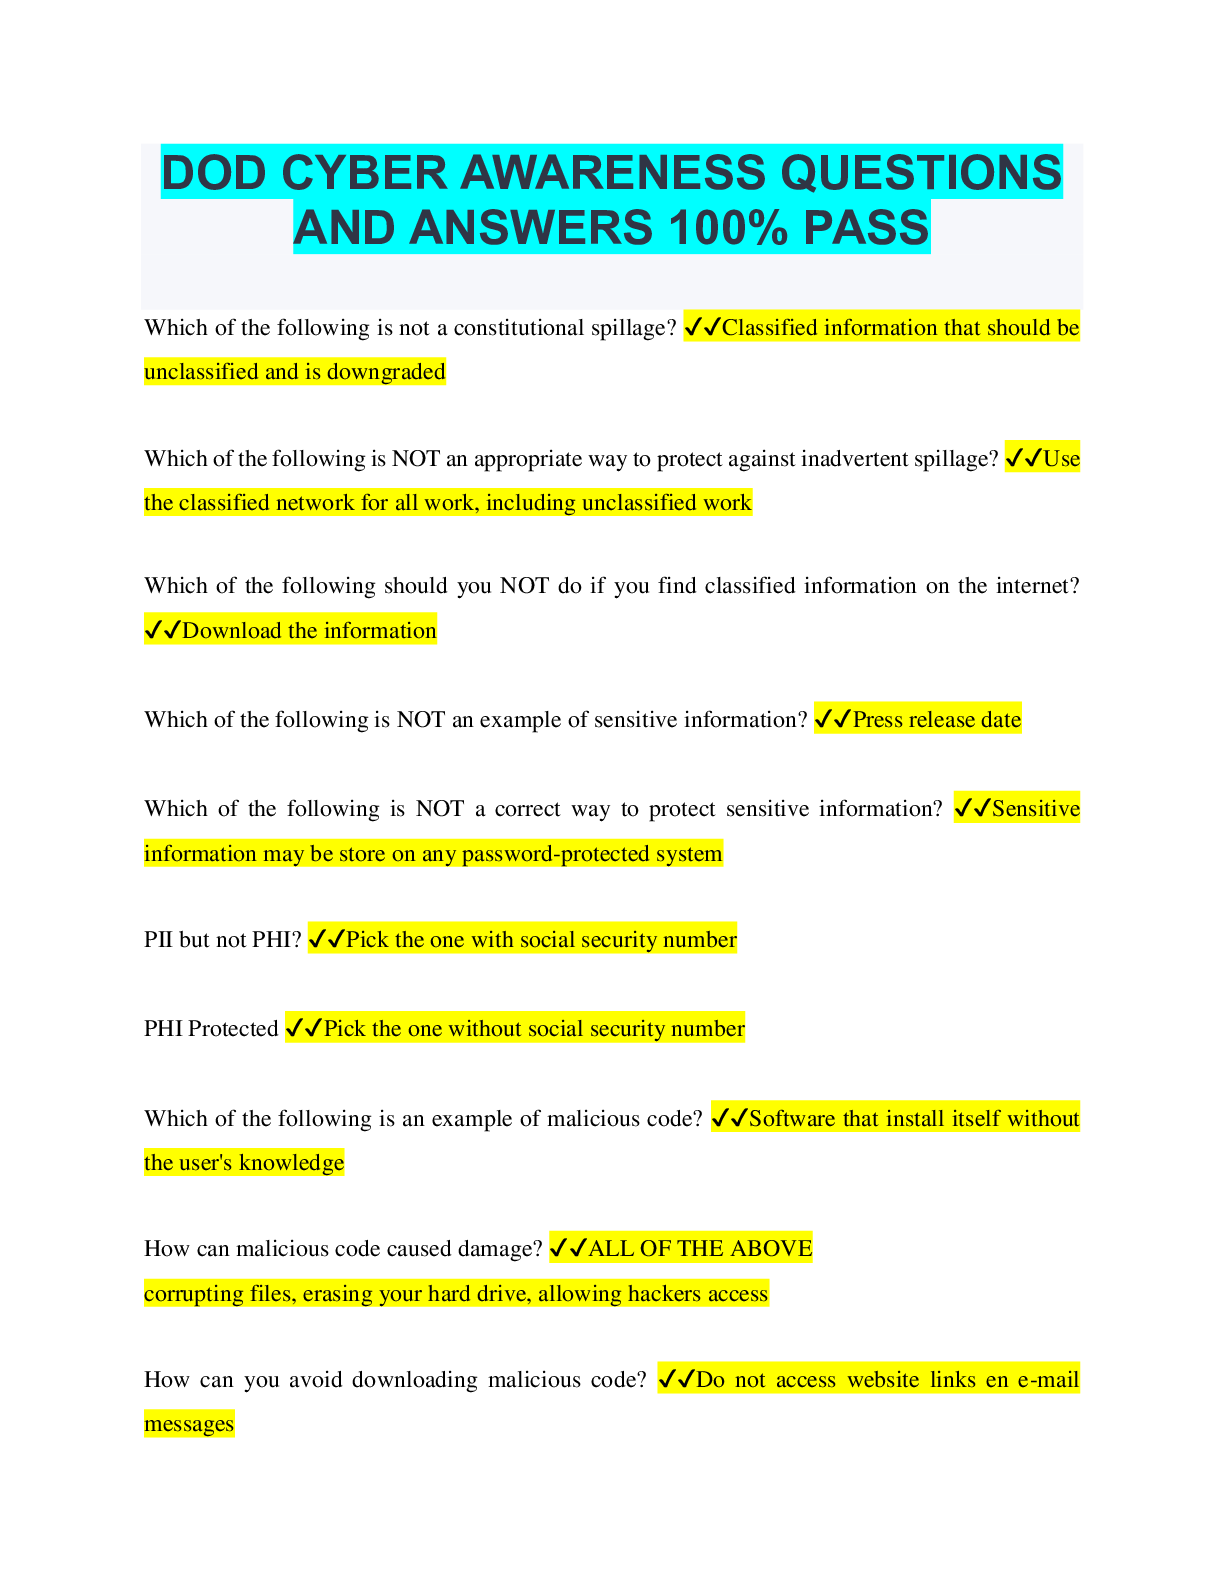 DOD CYBER AWARENESS QUESTIONS AND ANSWERS 100 PASS Browsegrades